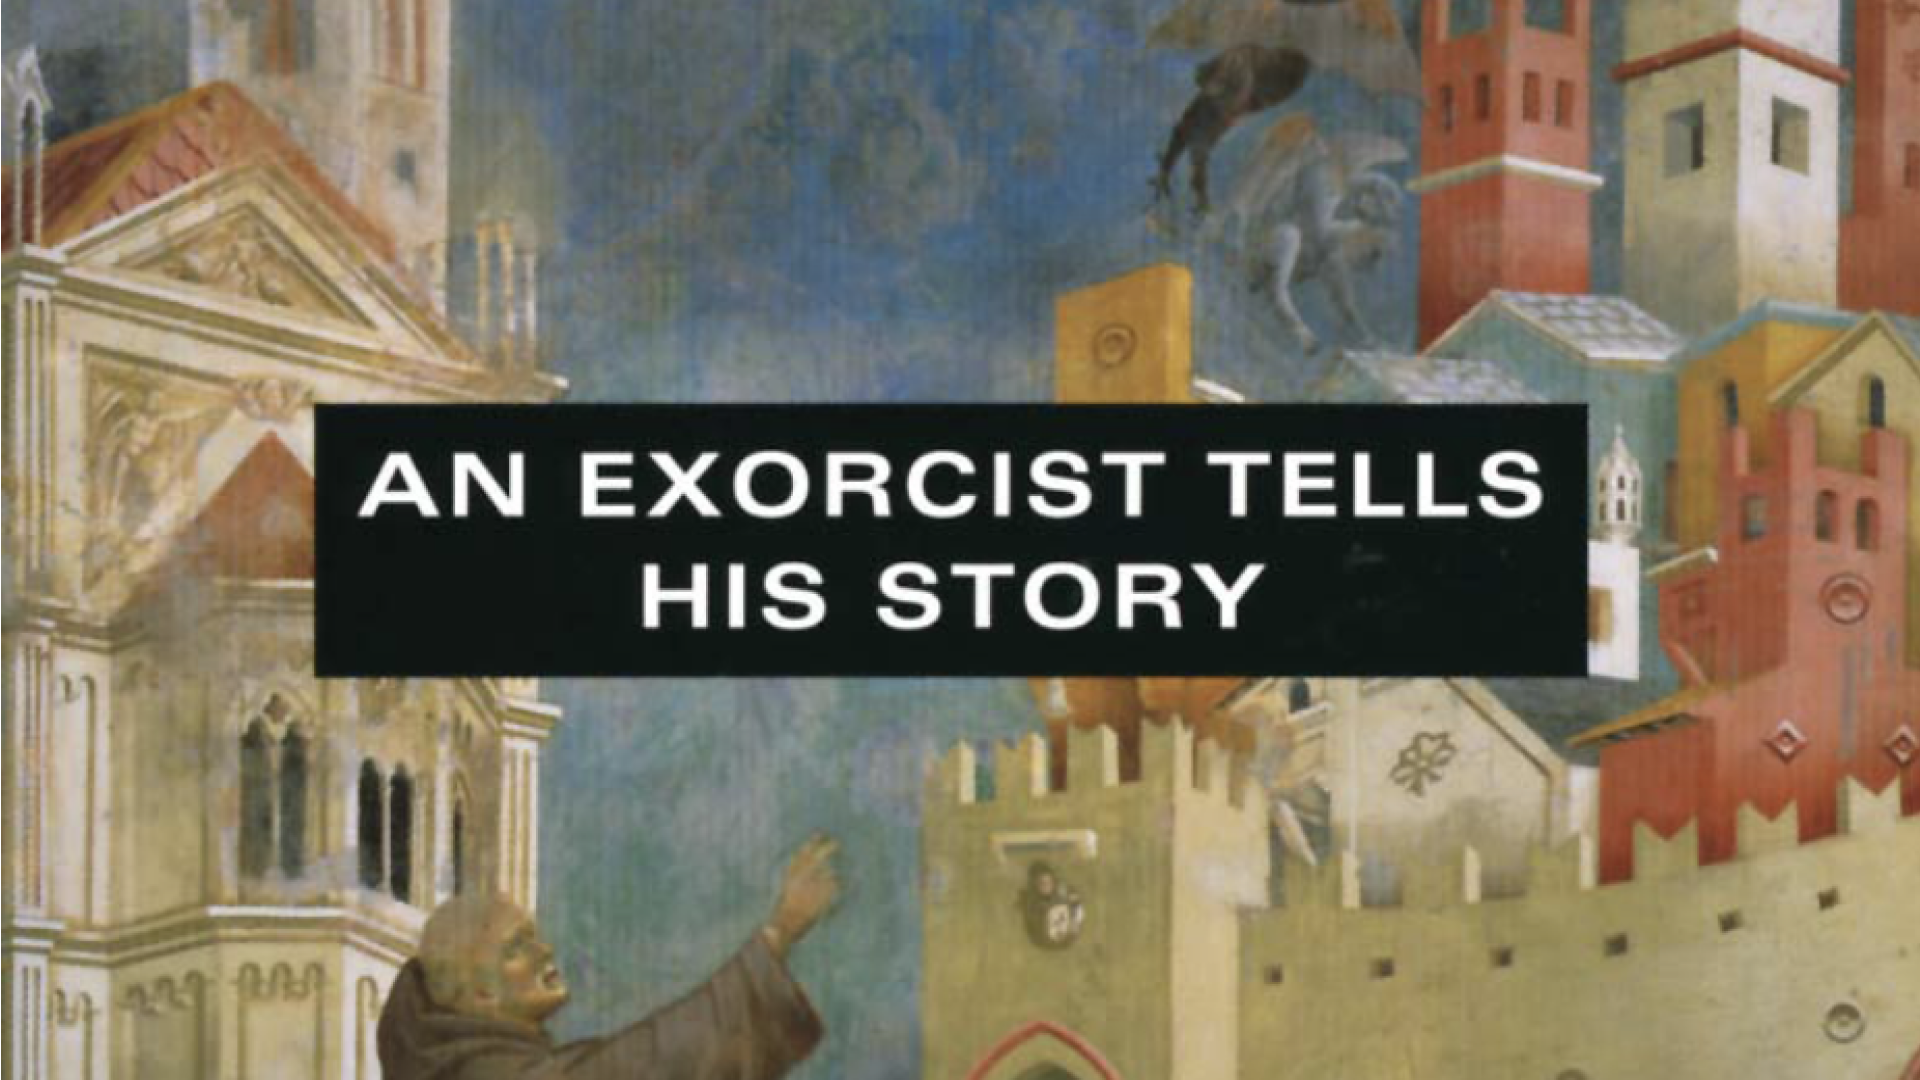 An Exorcist Tells His Story by Fr. Gabriele Amorth